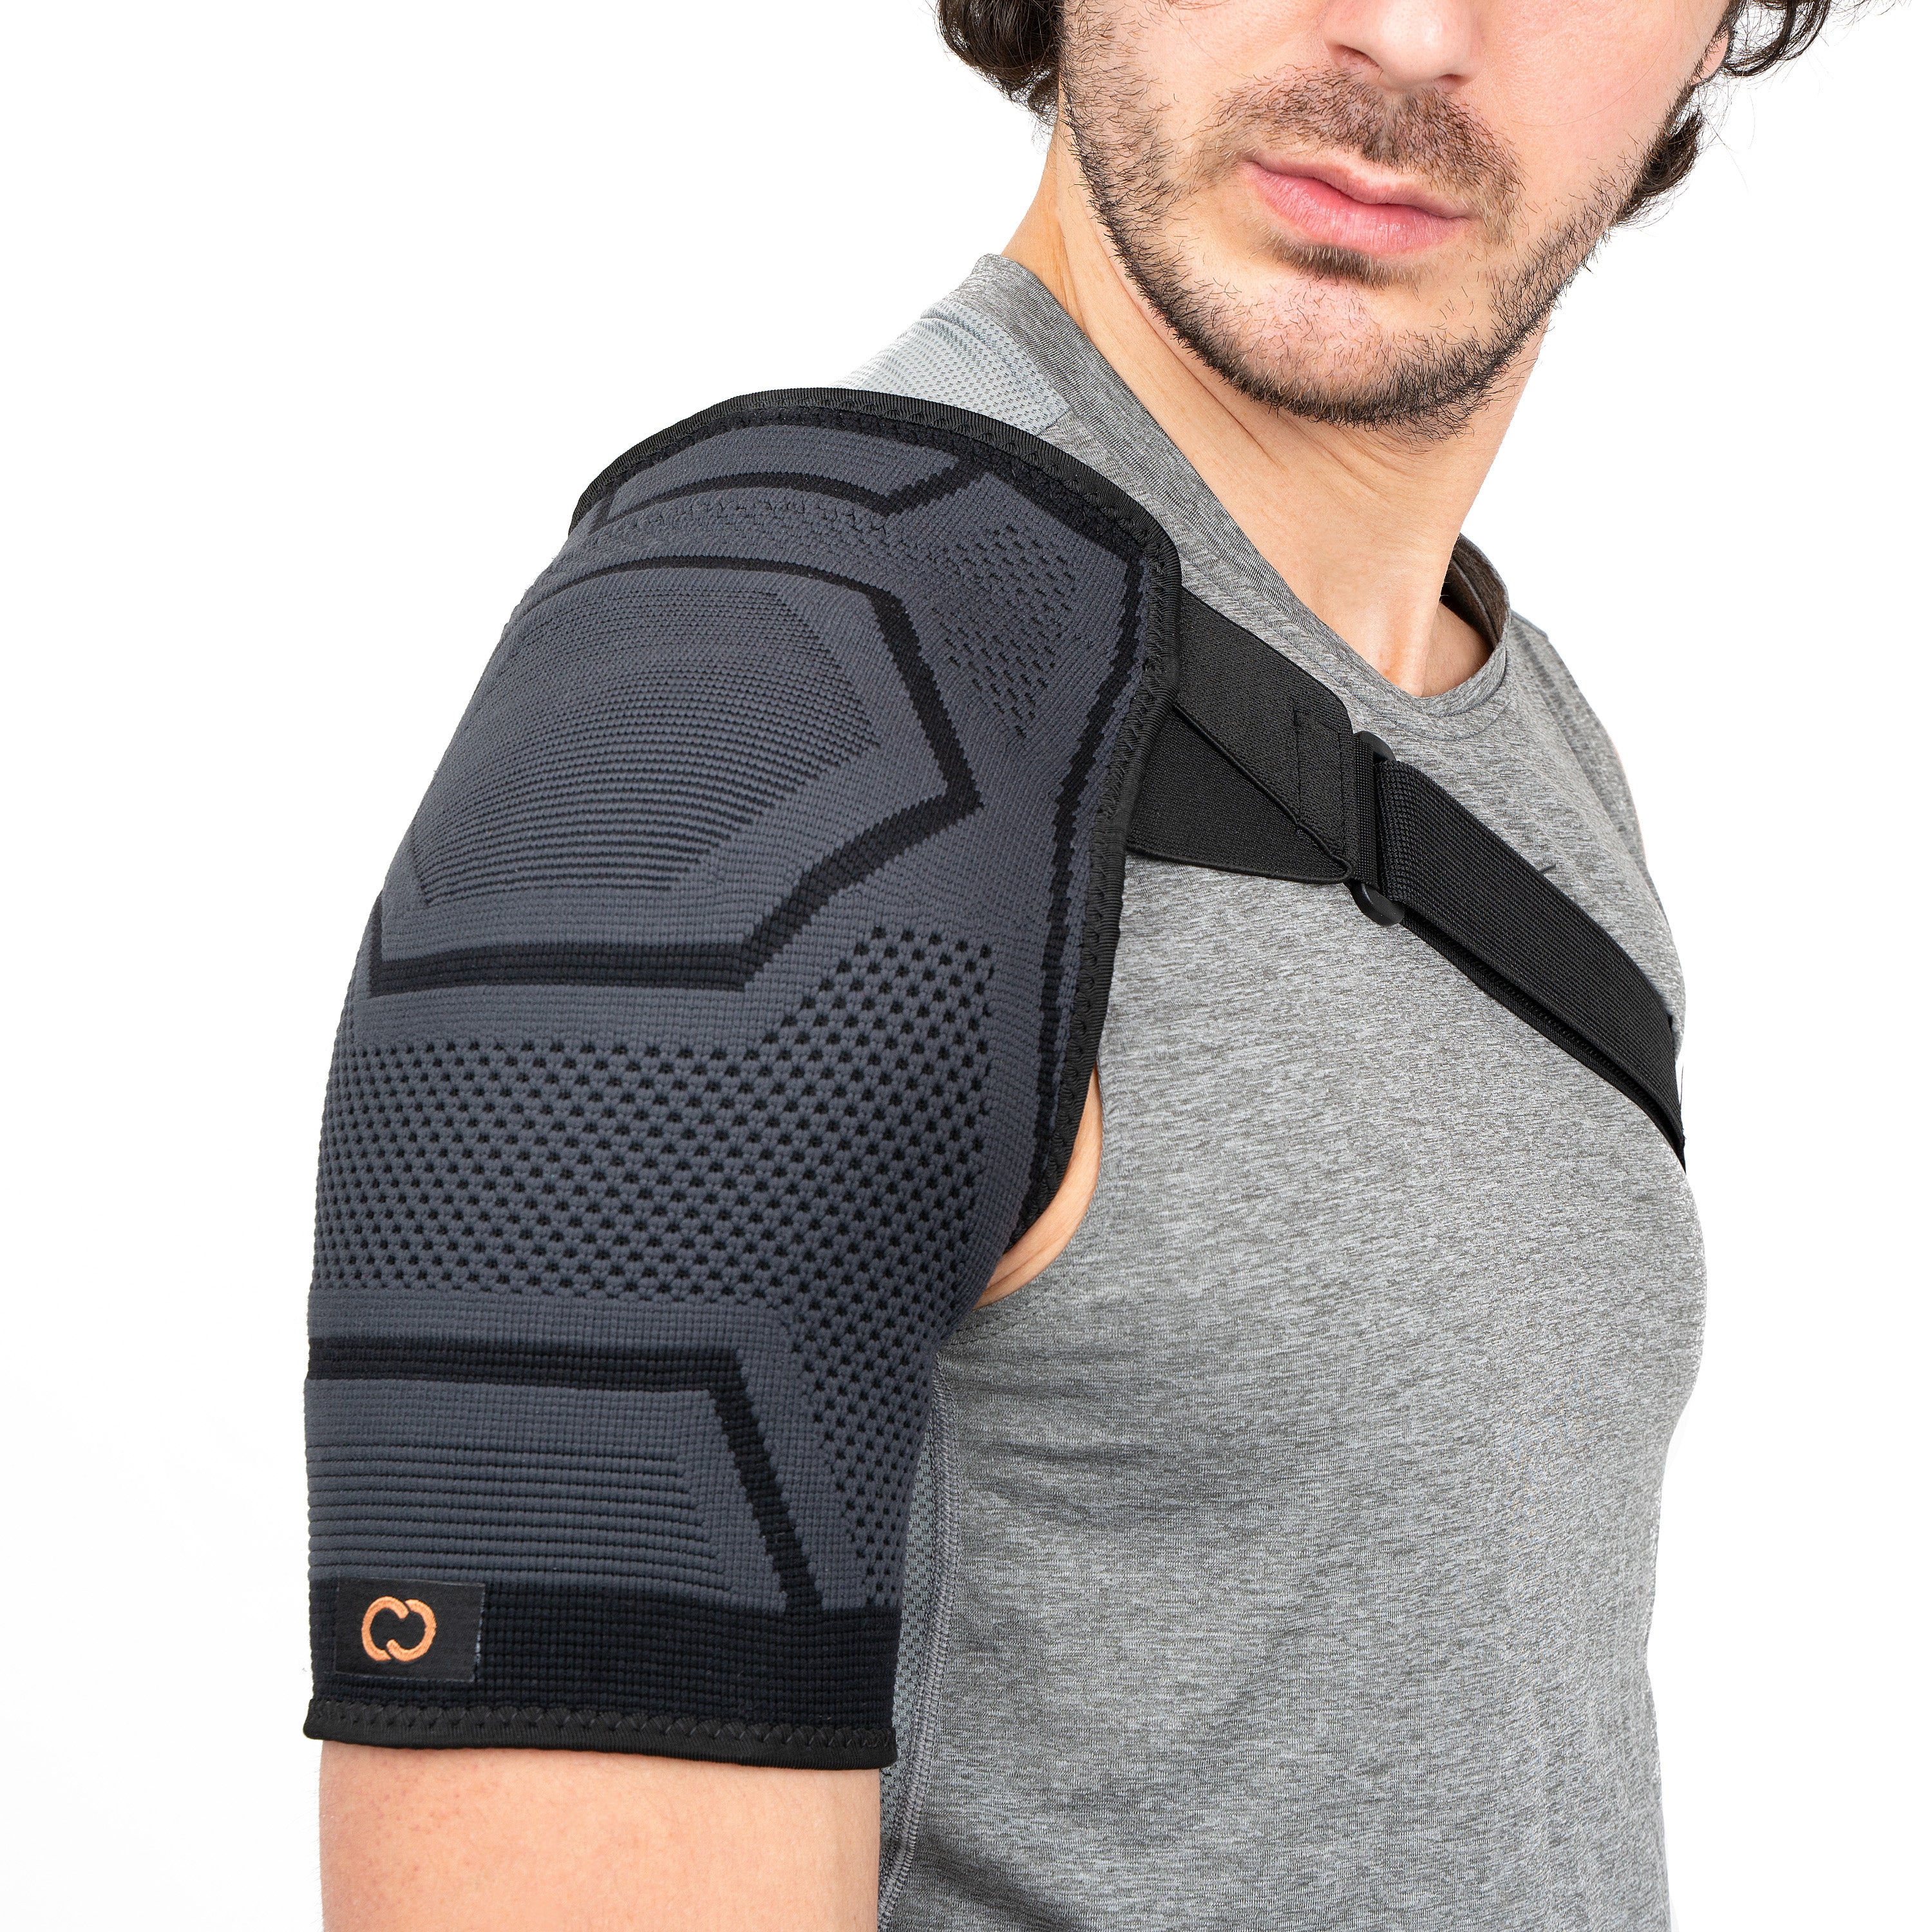 Shoulder Brace Recovery Highest Copper Content Support Adjstable Fit Sleeve  Wrap